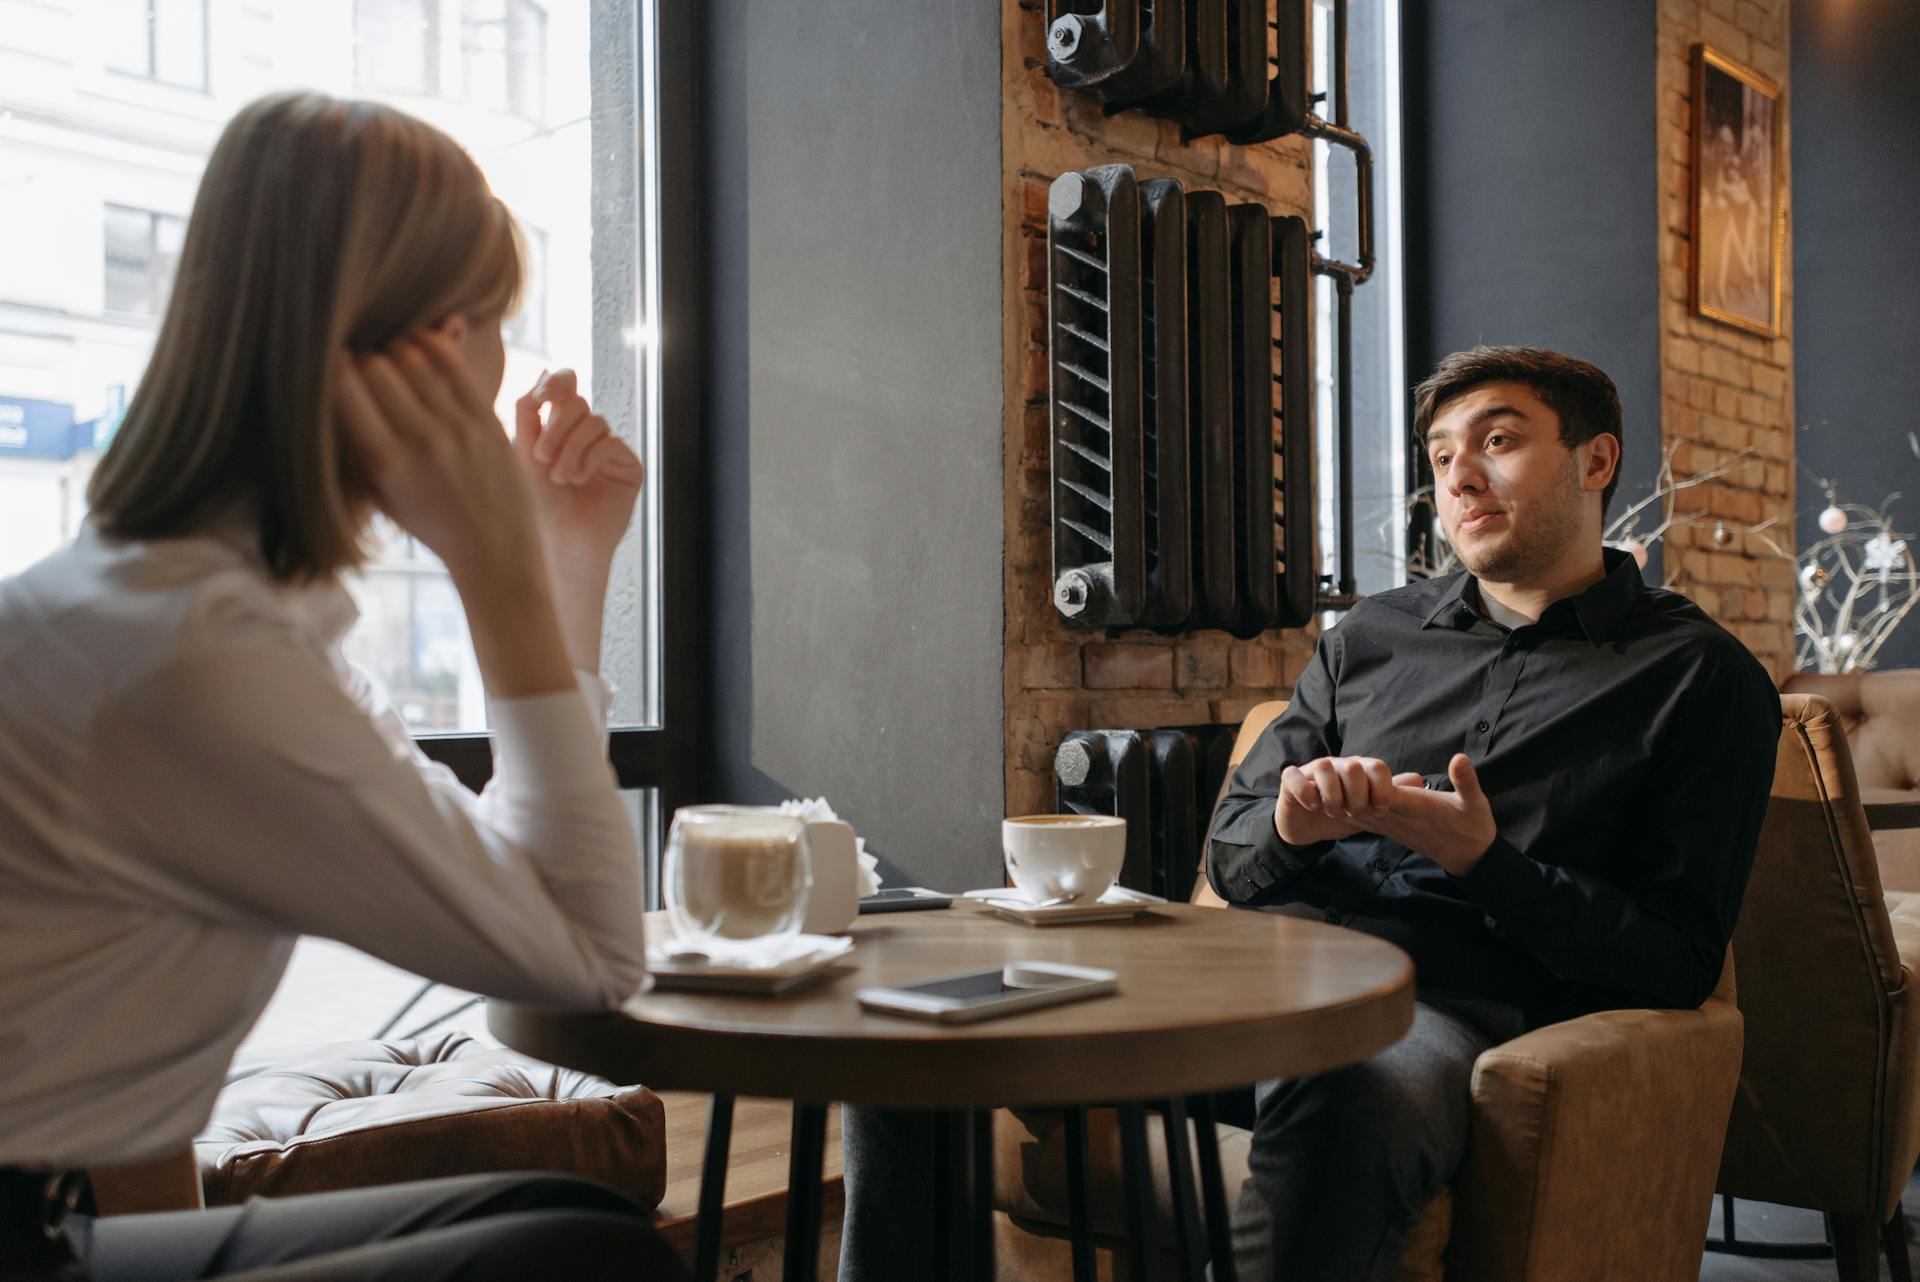 Couple seated in a coffee shop | Source: Pexels